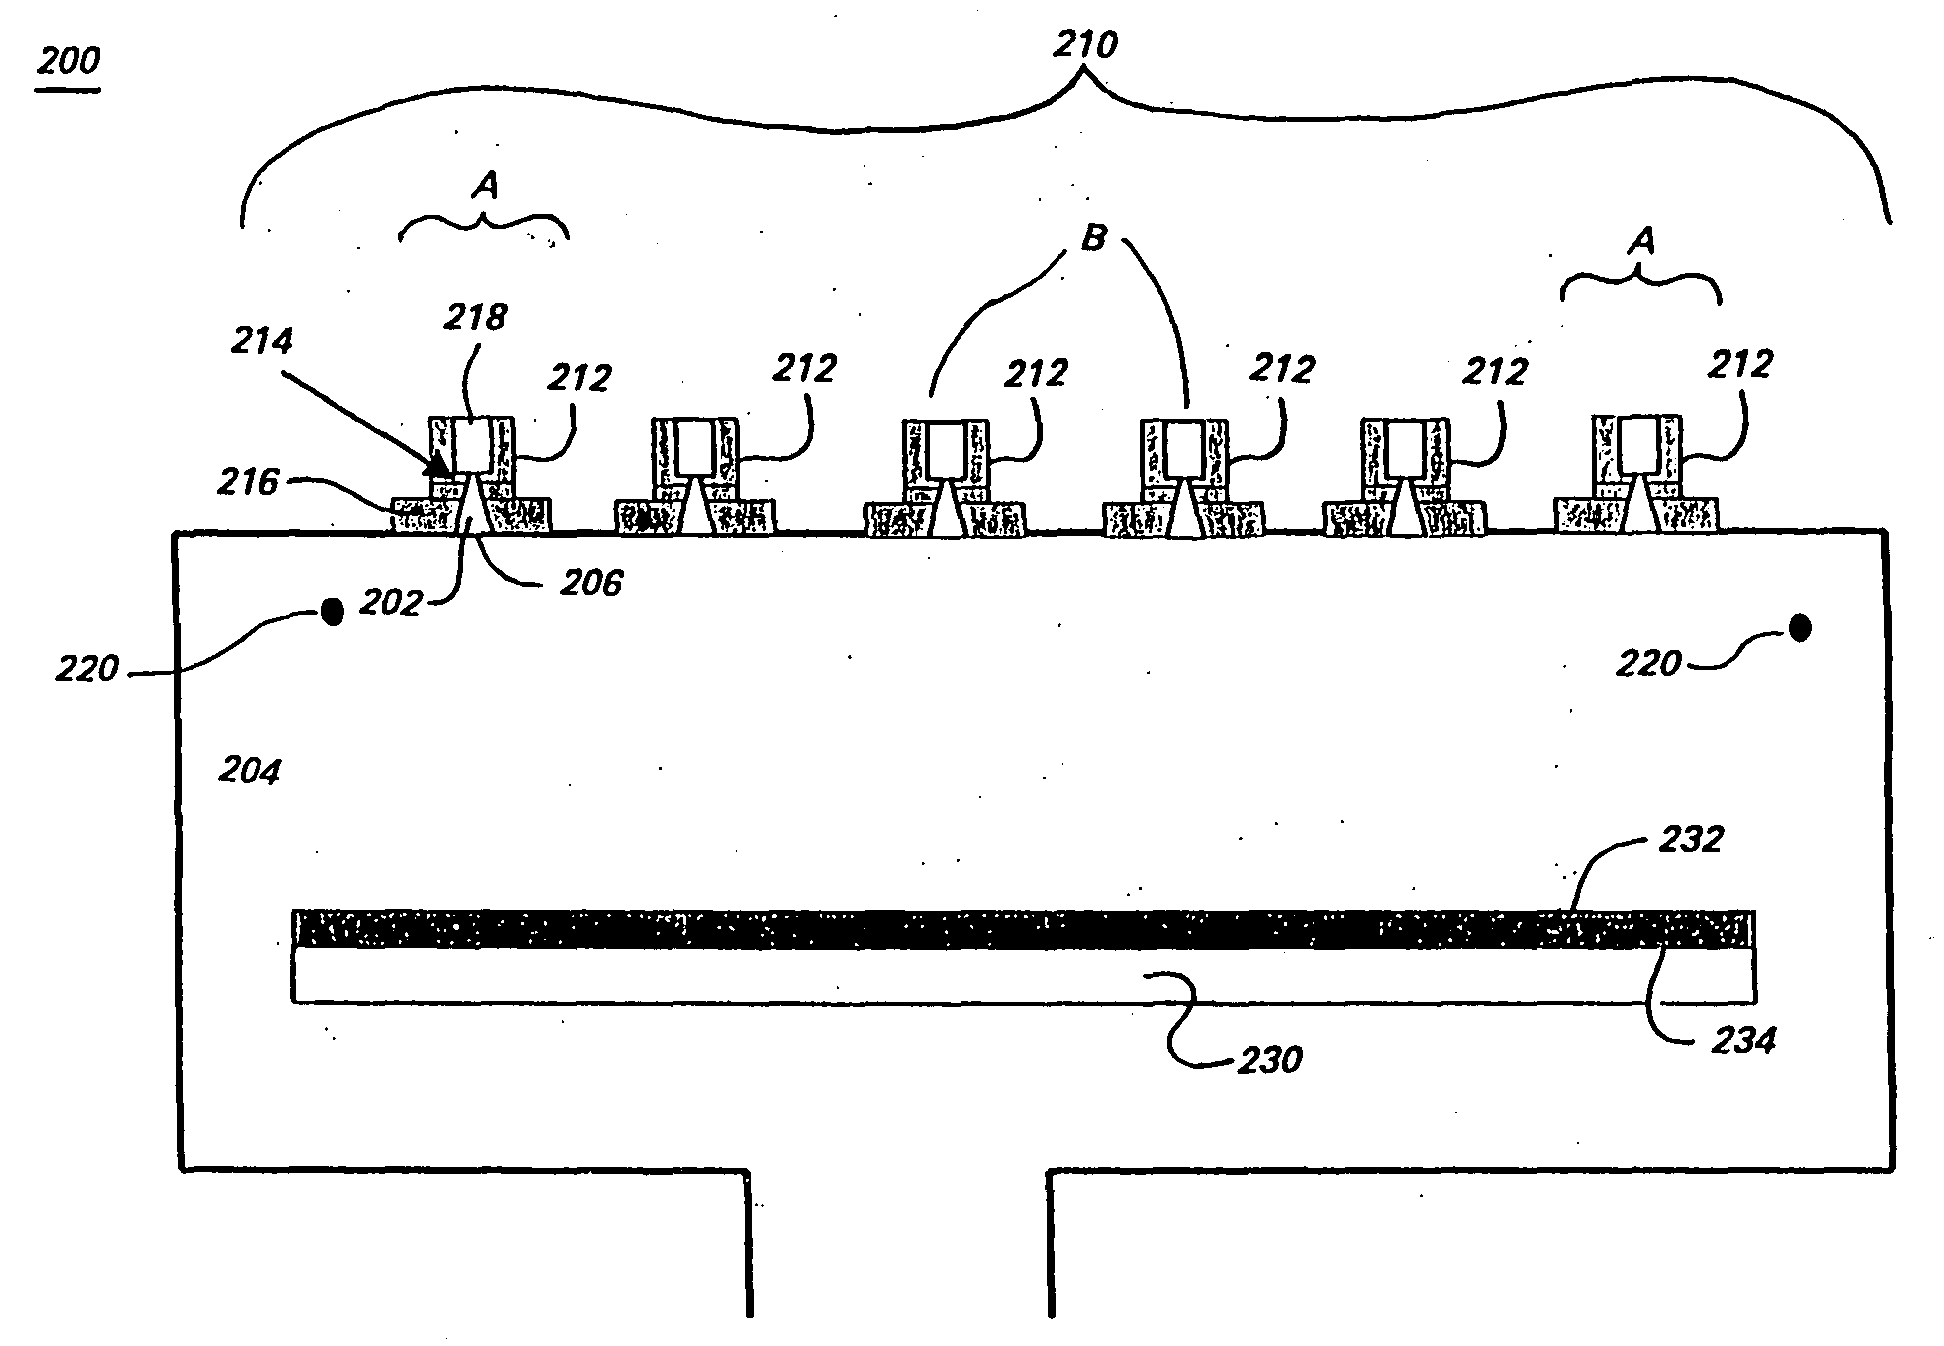 Apparatus and method for depositing large area coatings on planar surfaces